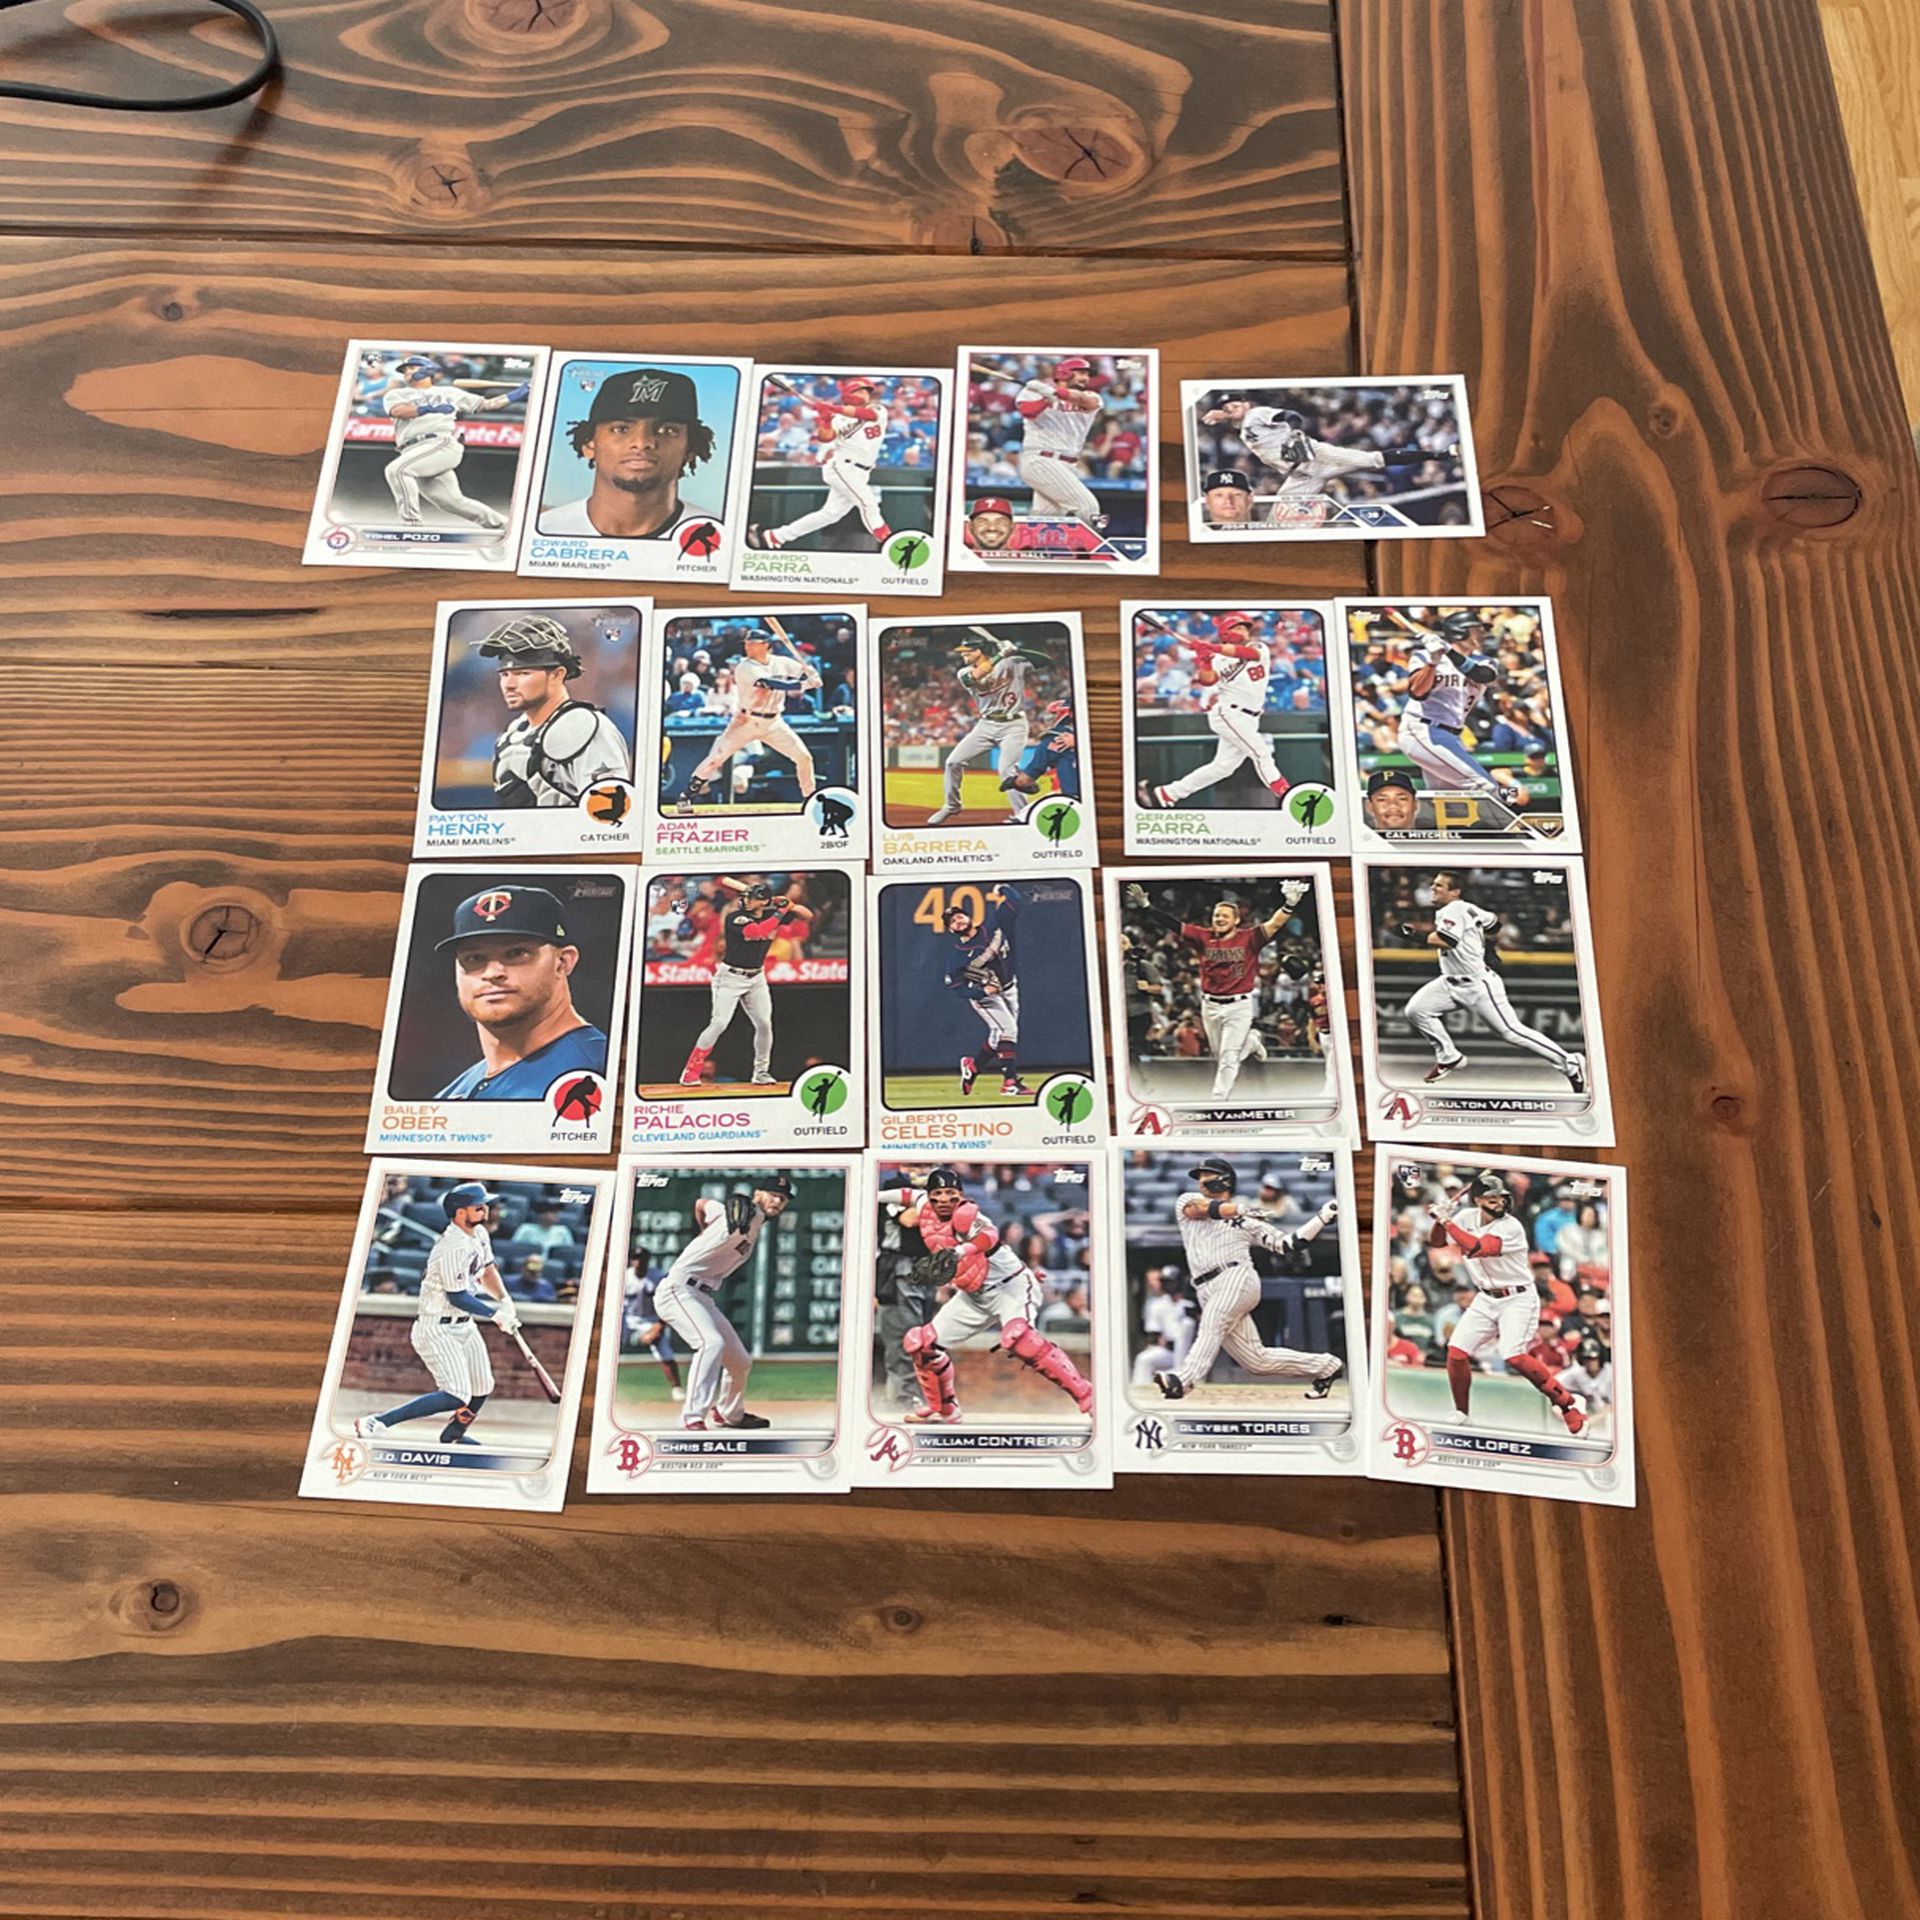 New and old baseball cards